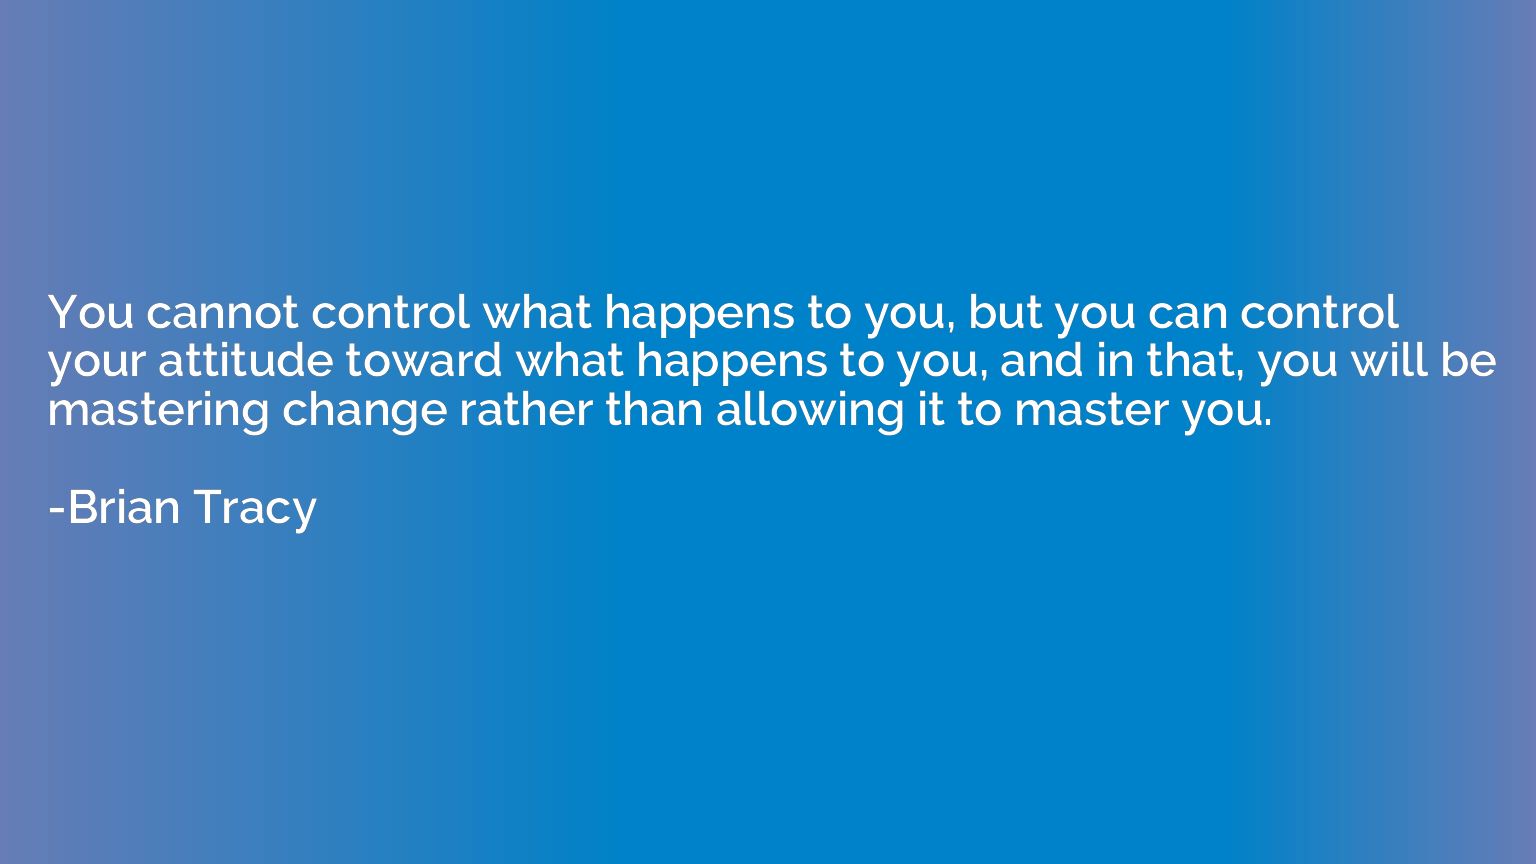 You cannot control what happens to you, but you can control 